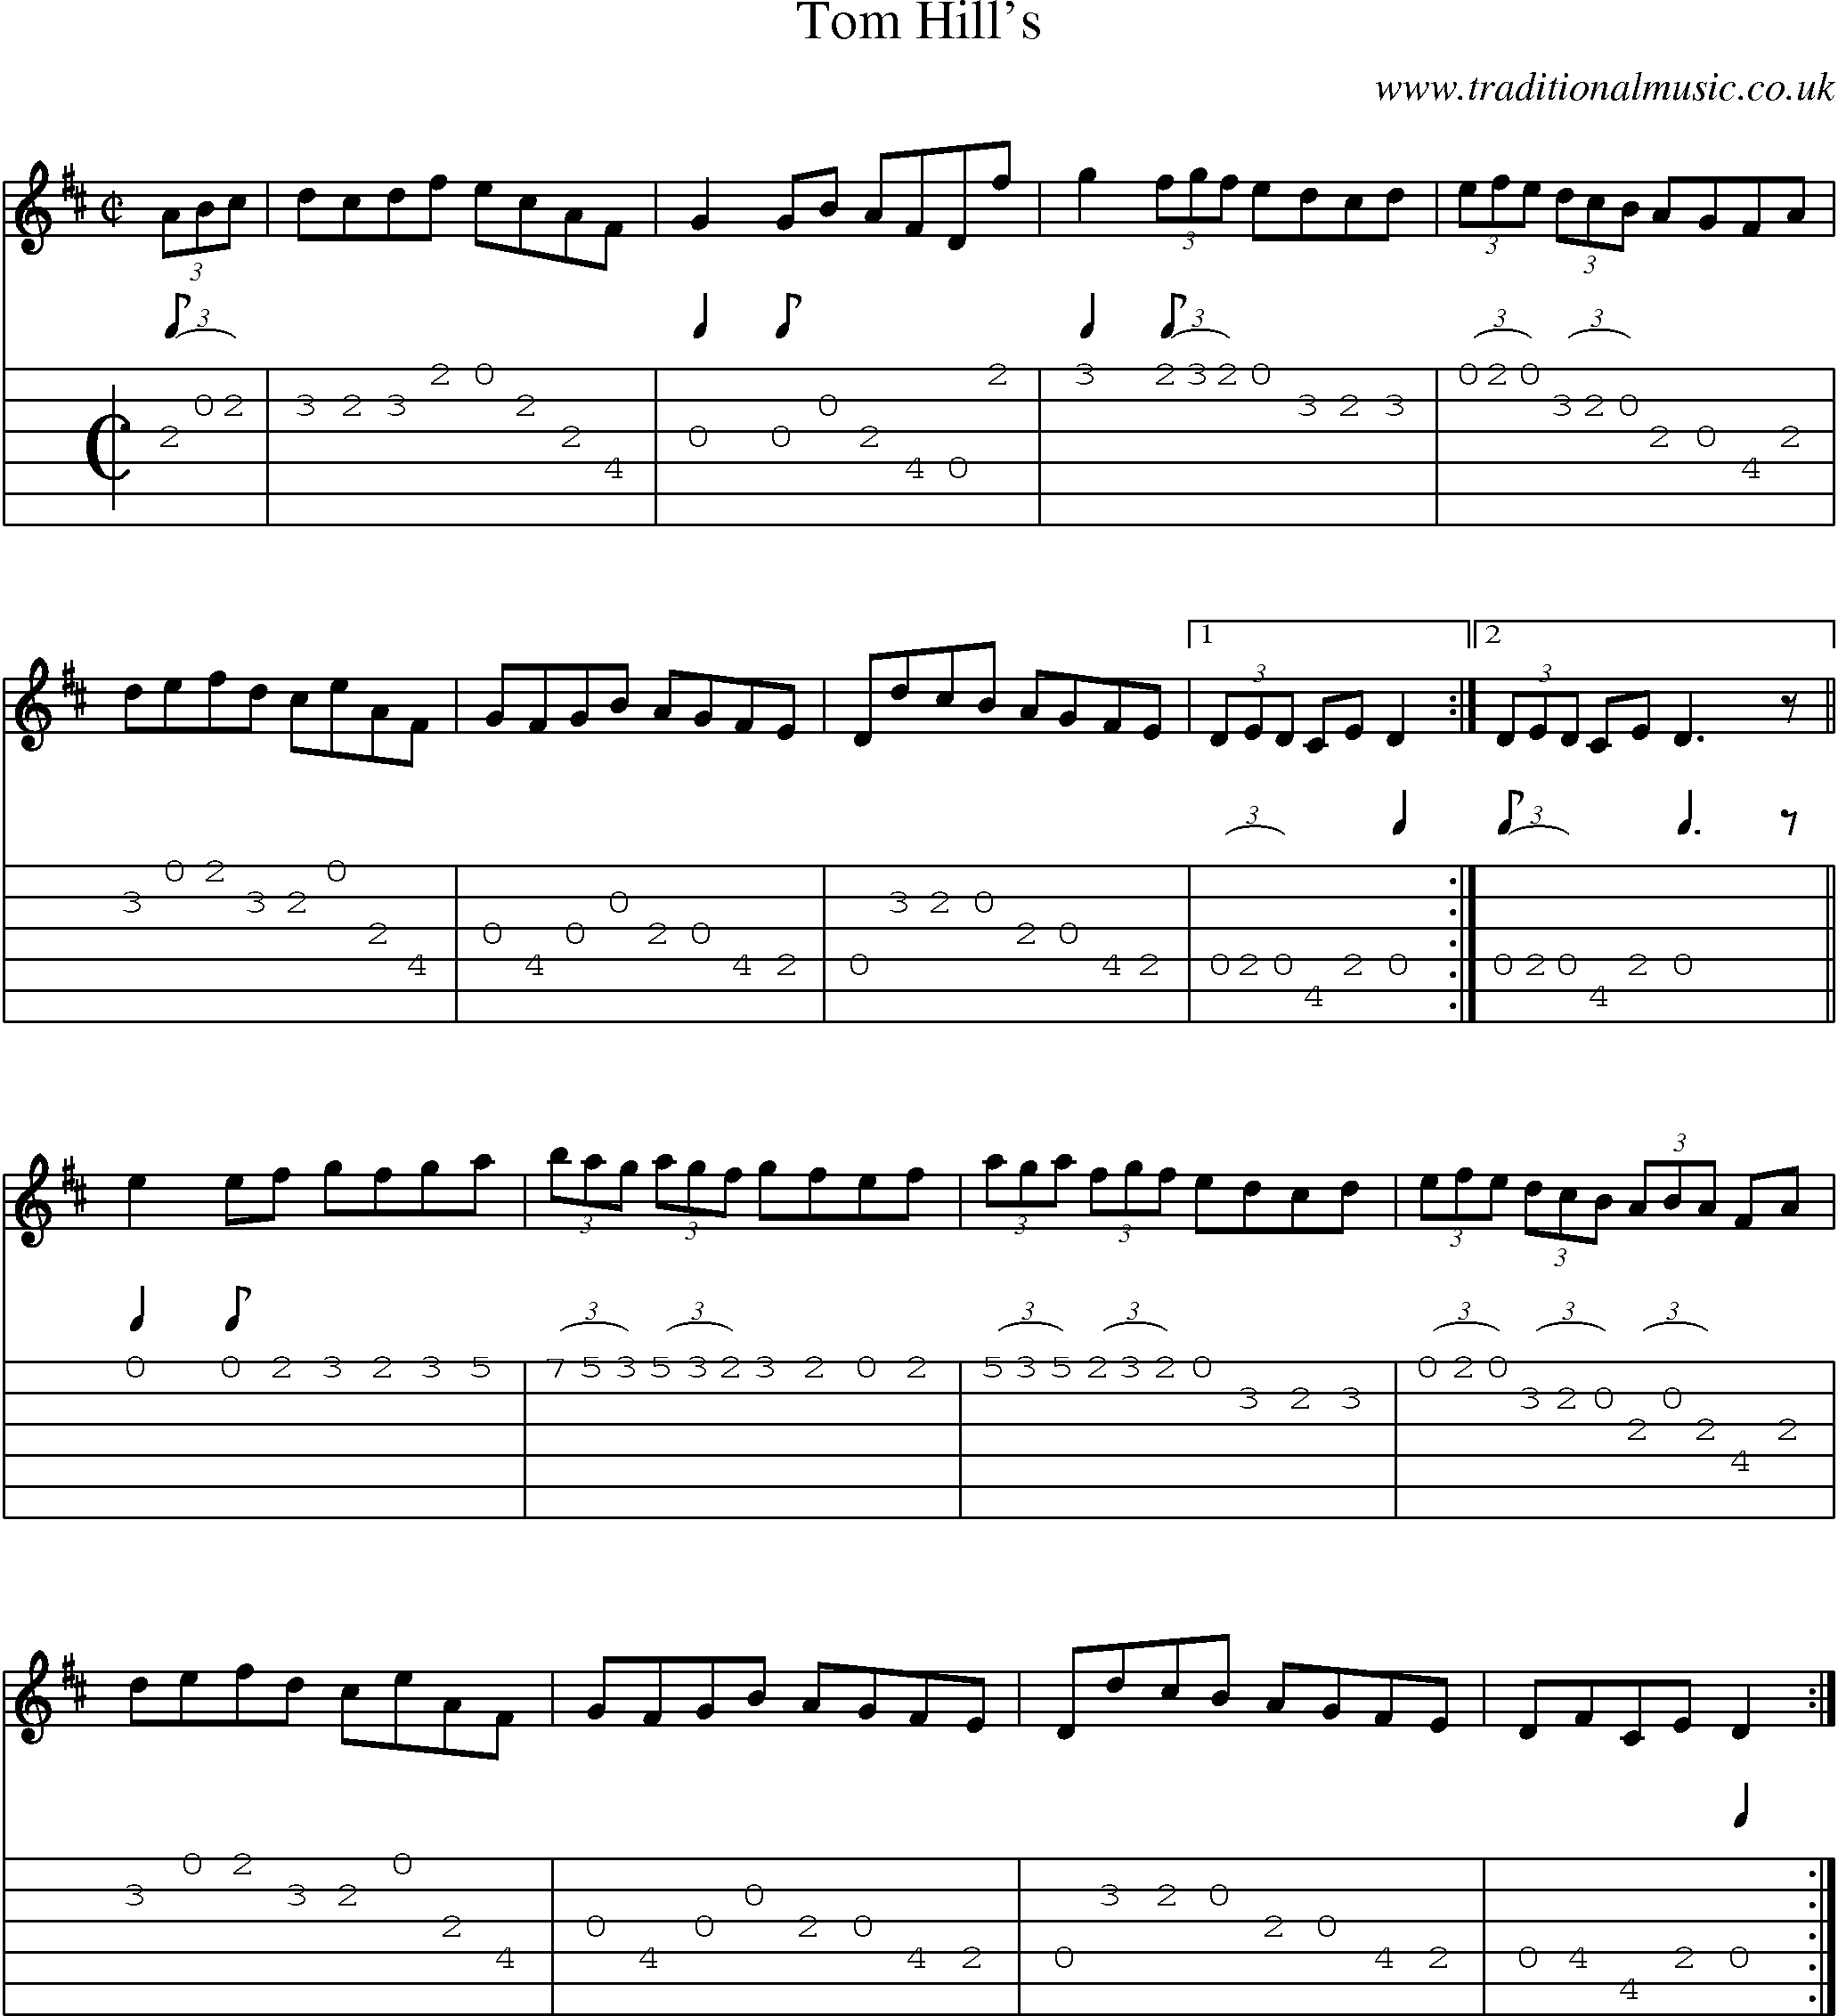 Music Score and Guitar Tabs for Tom Hills